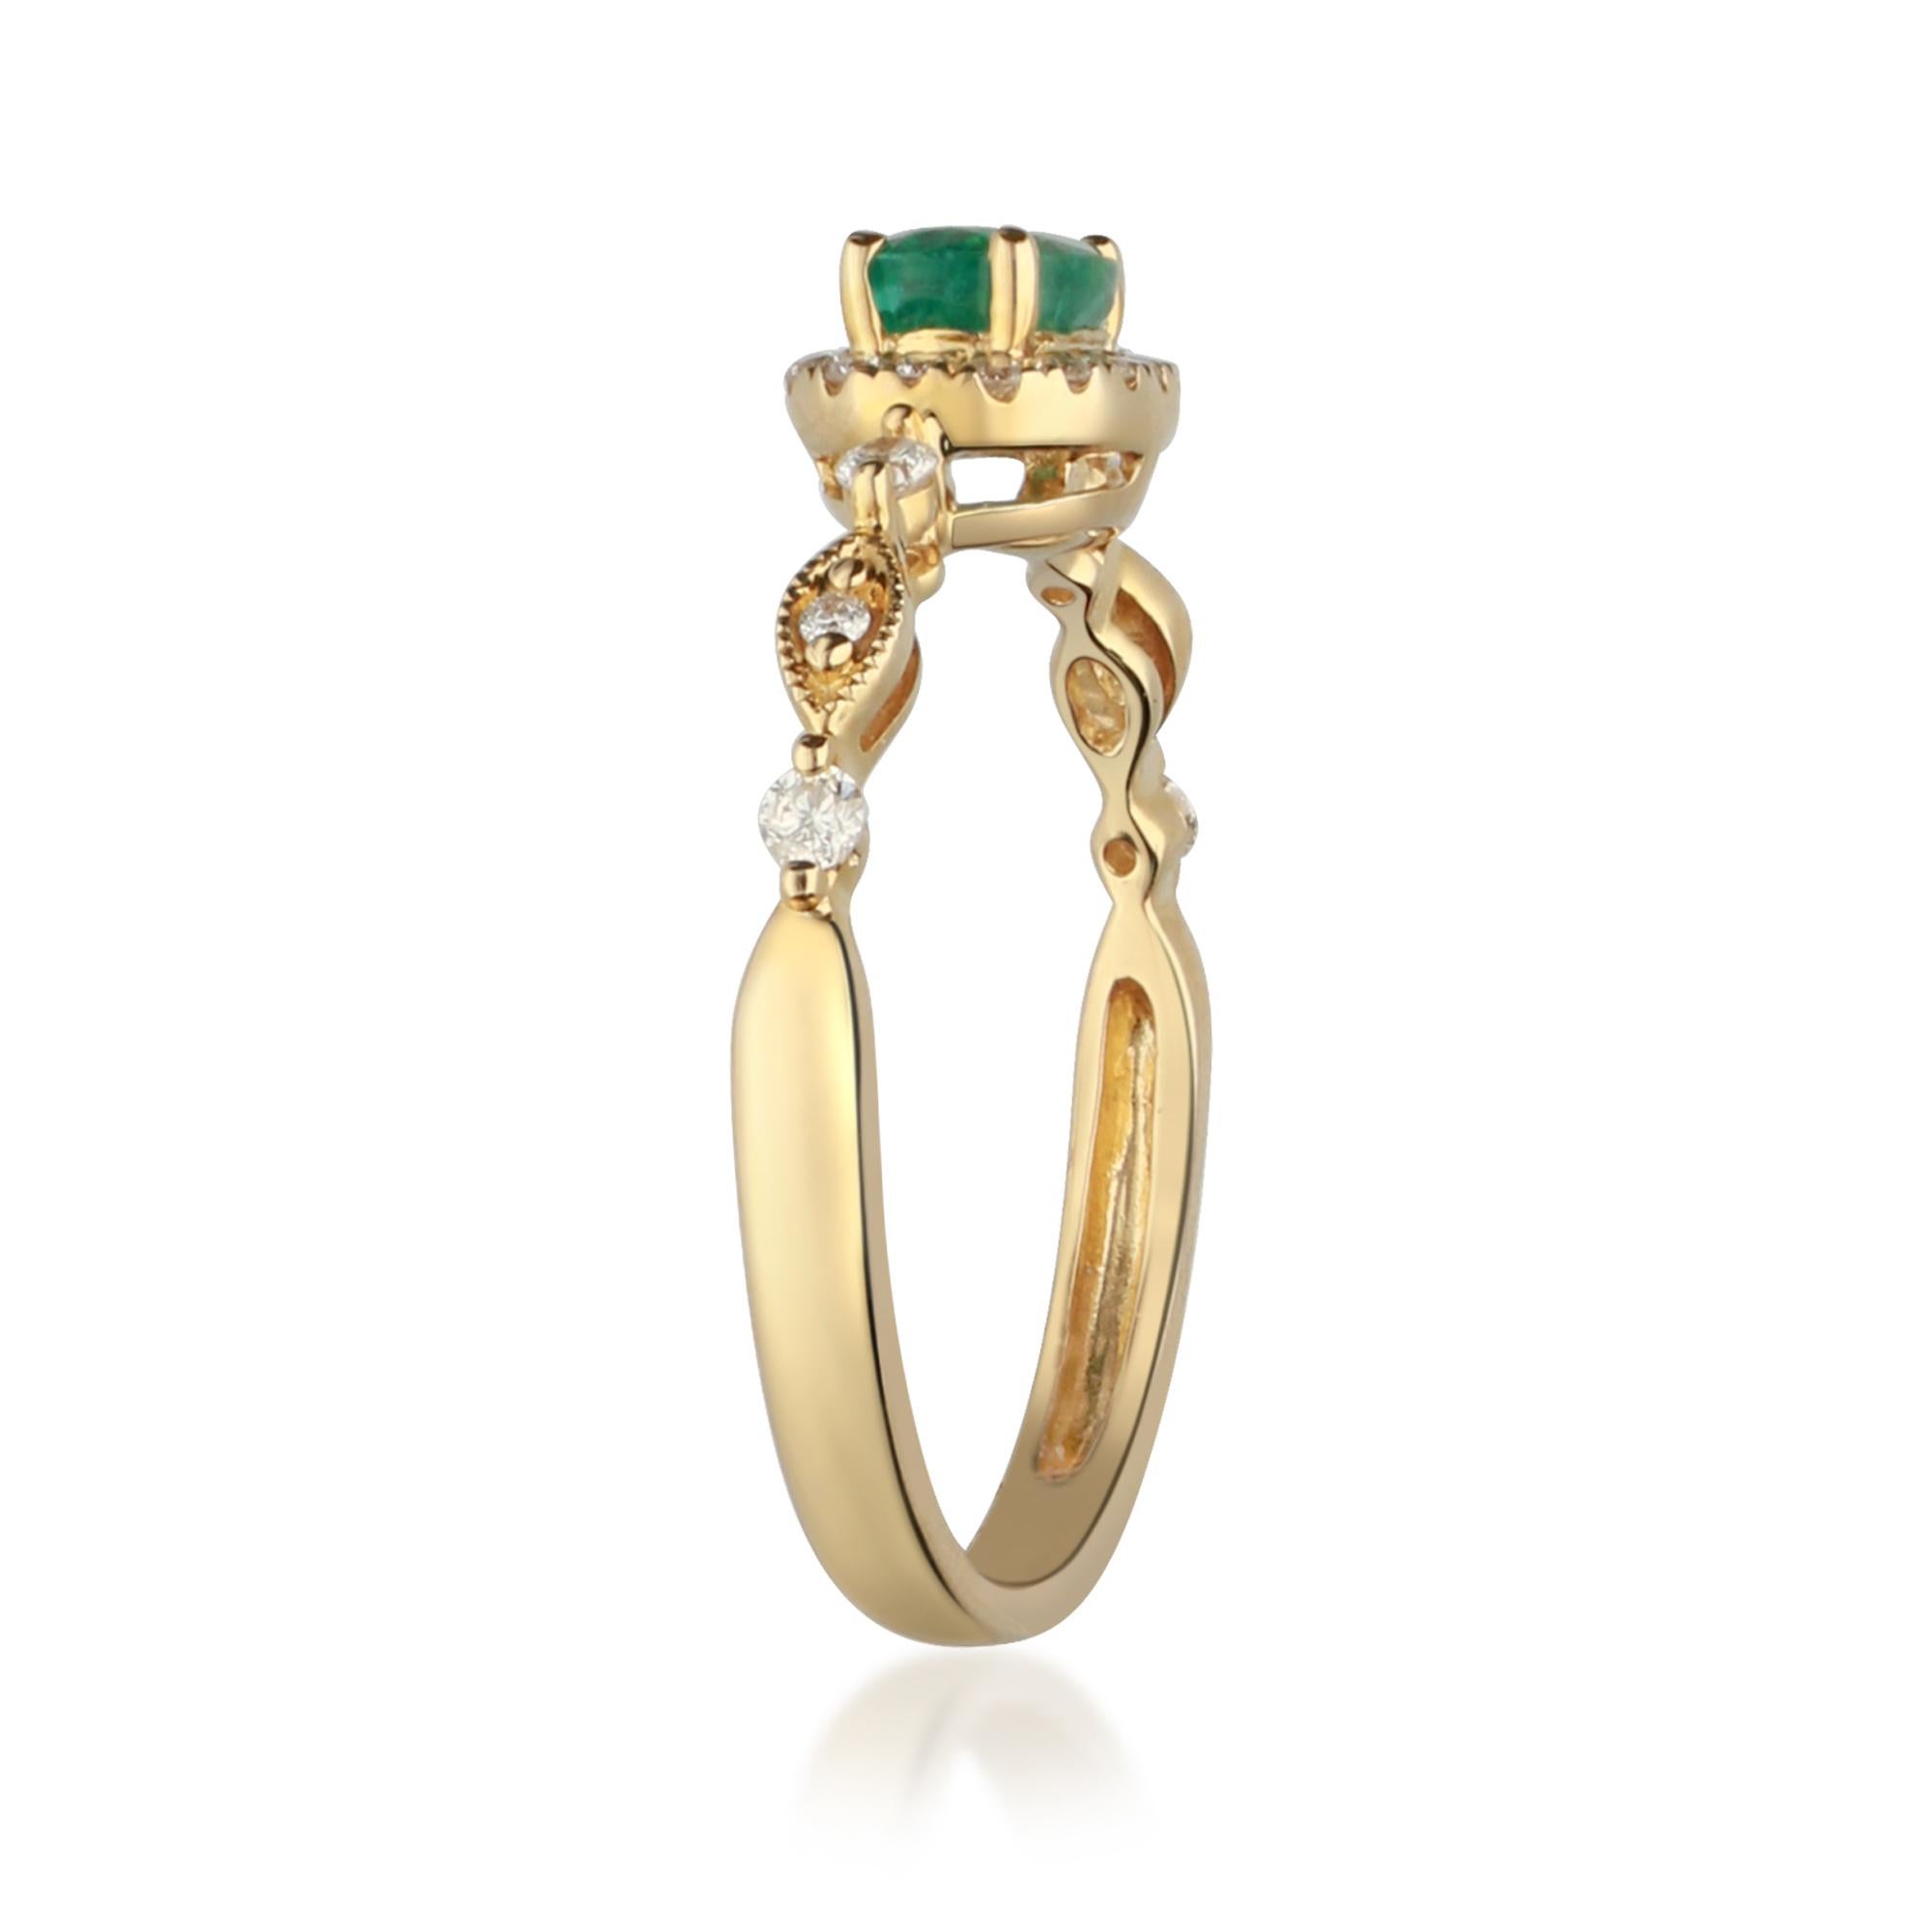 Stunning, timeless and classy eternity Unique Ring. Decorate yourself in luxury with this Gin & Grace Ring. The 14K Yellow Gold jewelry boasts with Oval-cut 1 pcs 0.41 carat Emerald and Natural Round-cut white Diamond (22 Pcs) 0.20 Carat accent